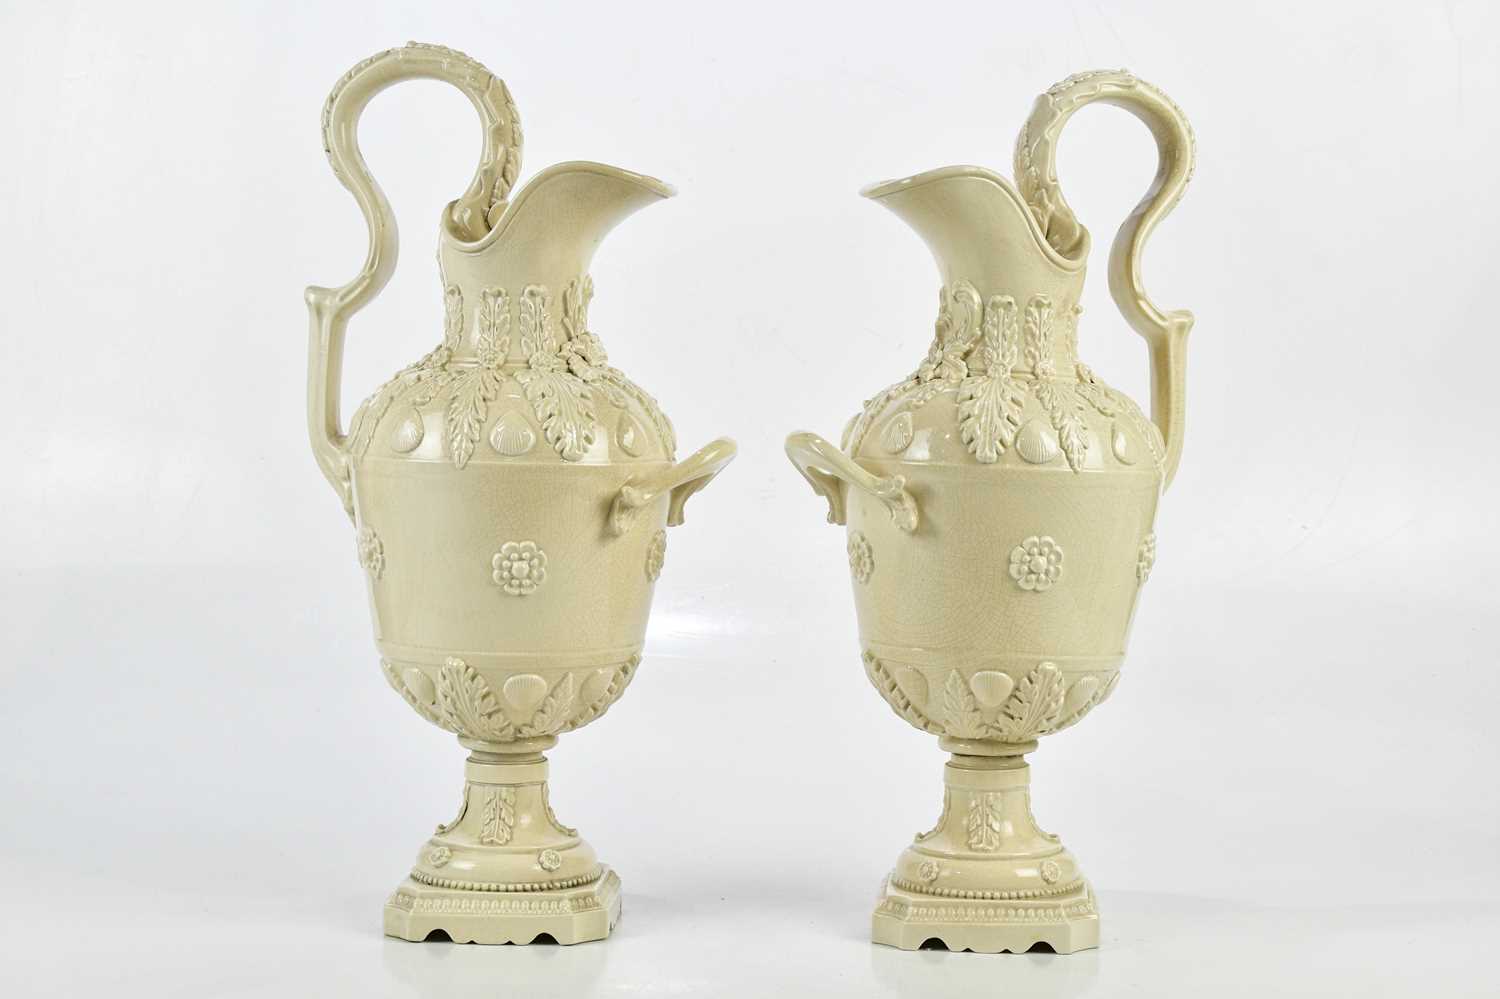 PETER WELDON; a pair of crackle glazed ewers, relief decorated with shells and floral detail, height